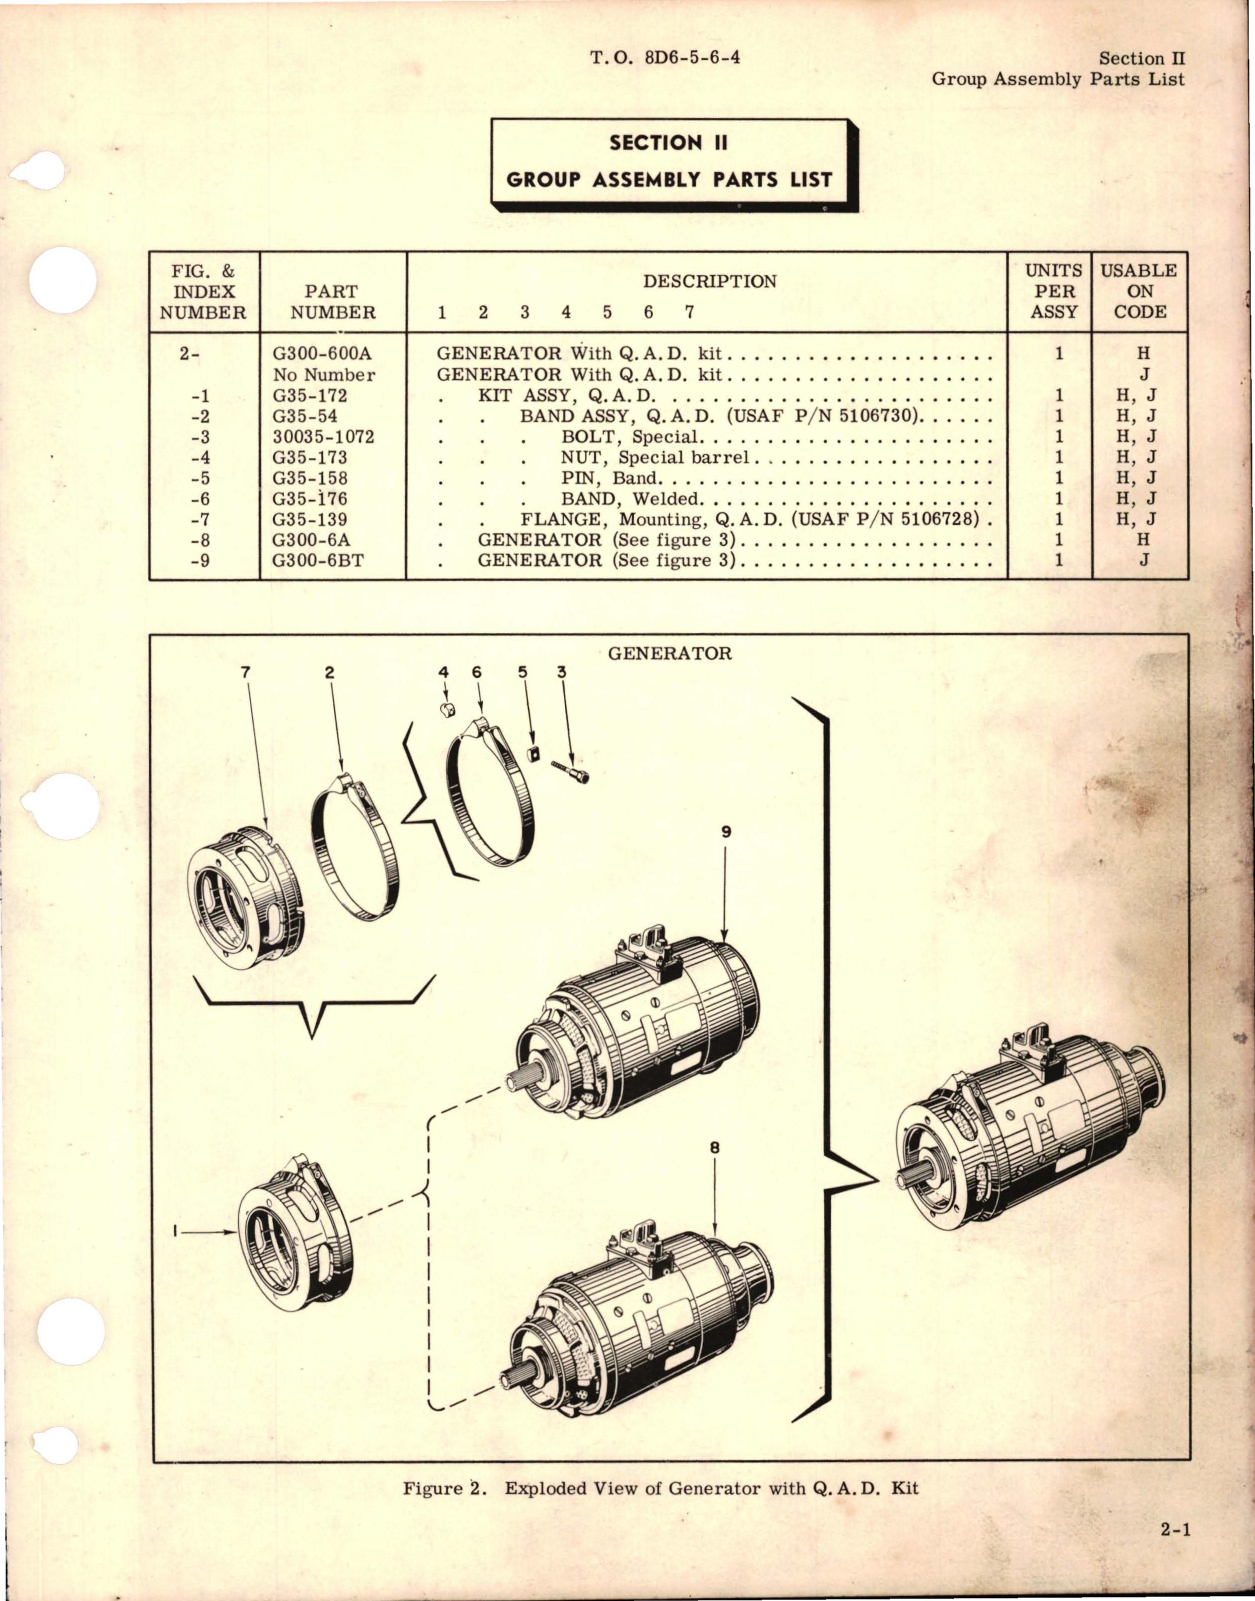 Sample page 7 from AirCorps Library document: Illustrated Parts Breakdown for Generator